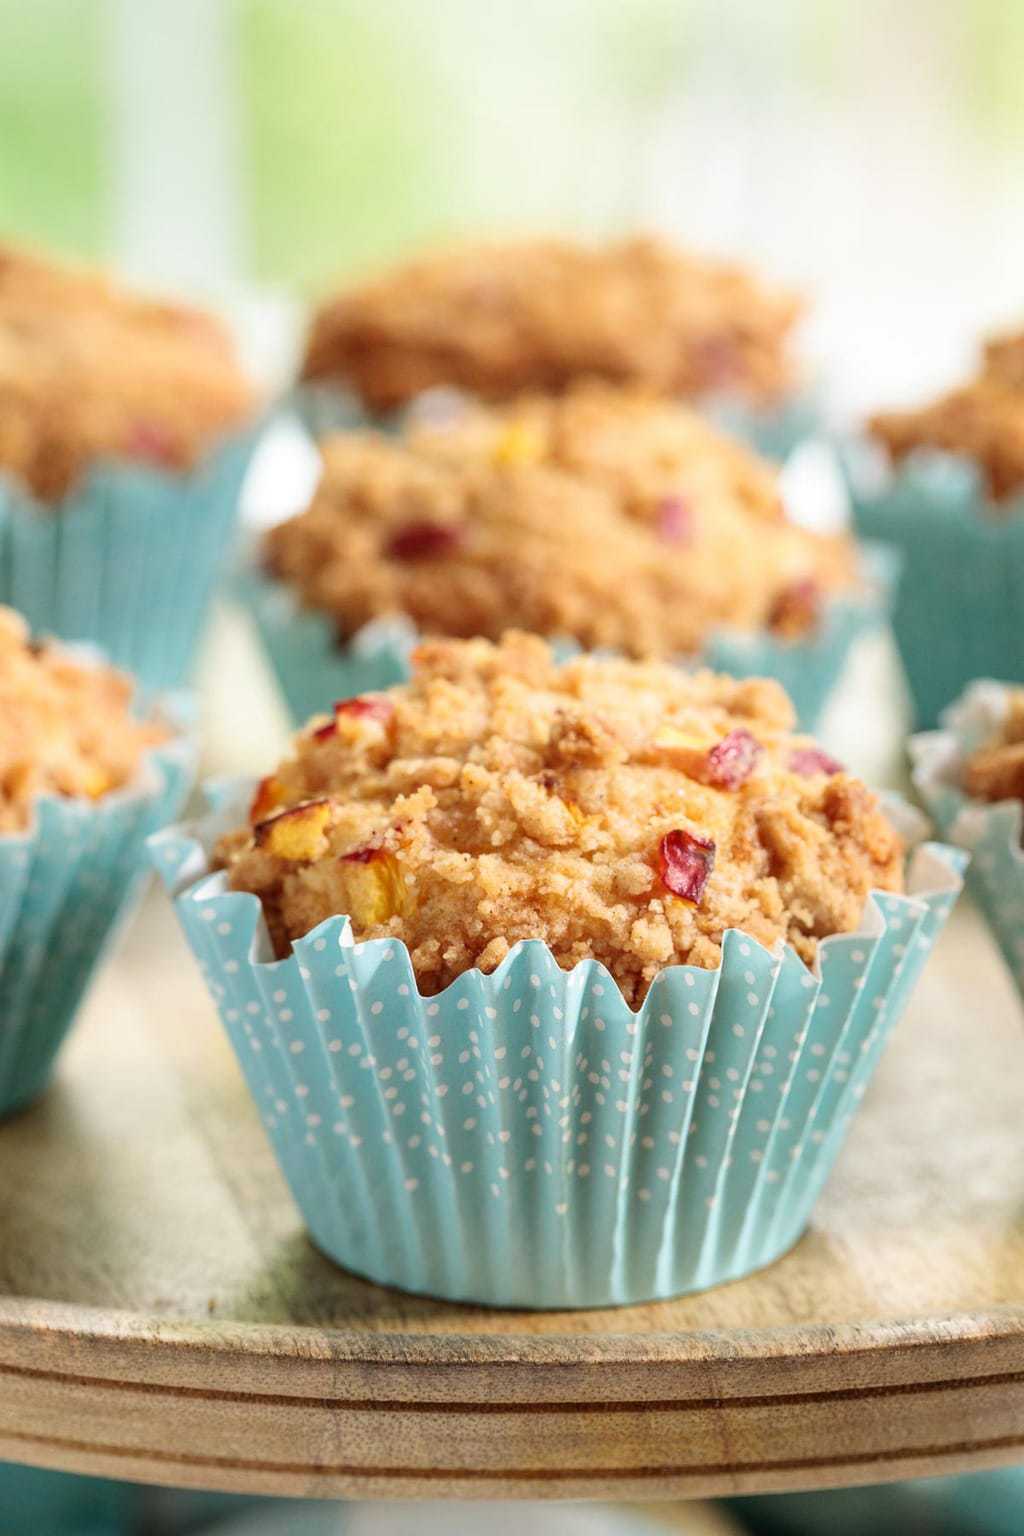 Vertical picture of peach crumble muffins in turquoise muffin liners